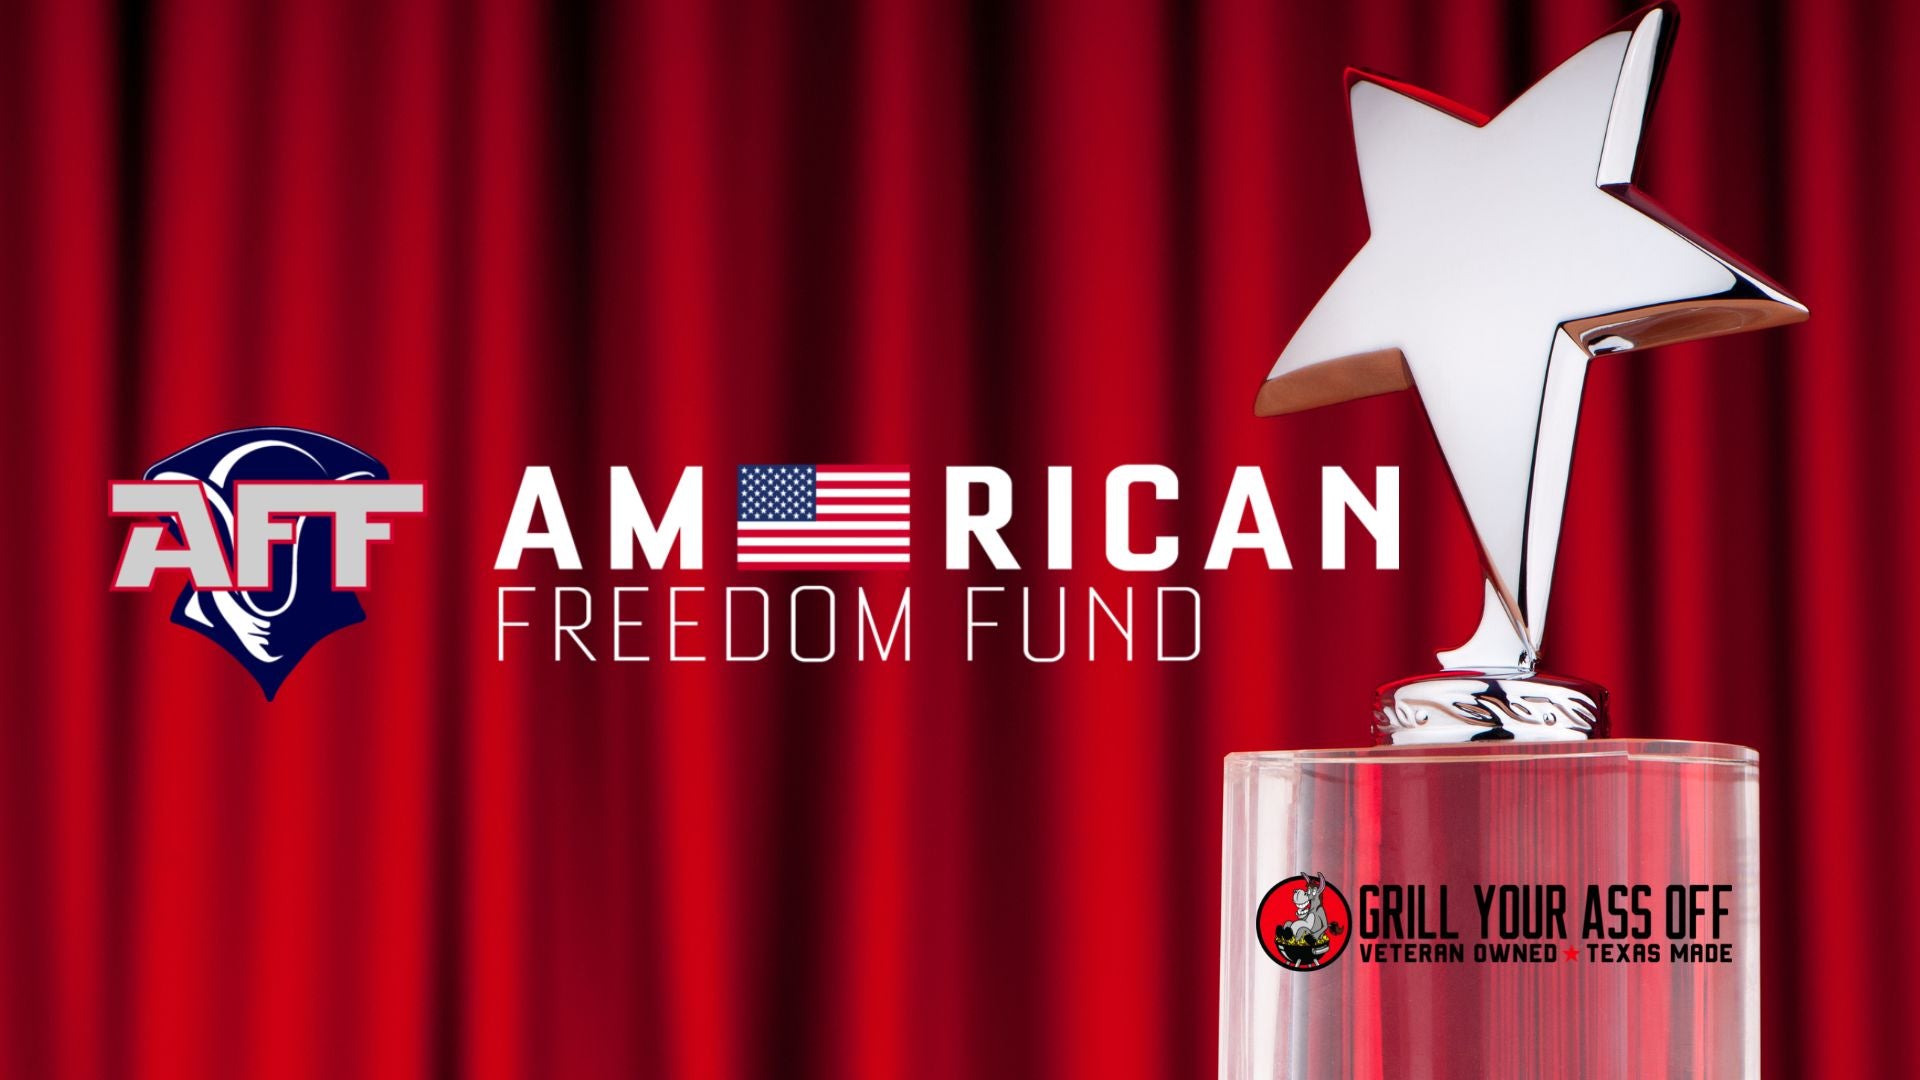 American Freedom Fund Small Business Of The Year Award